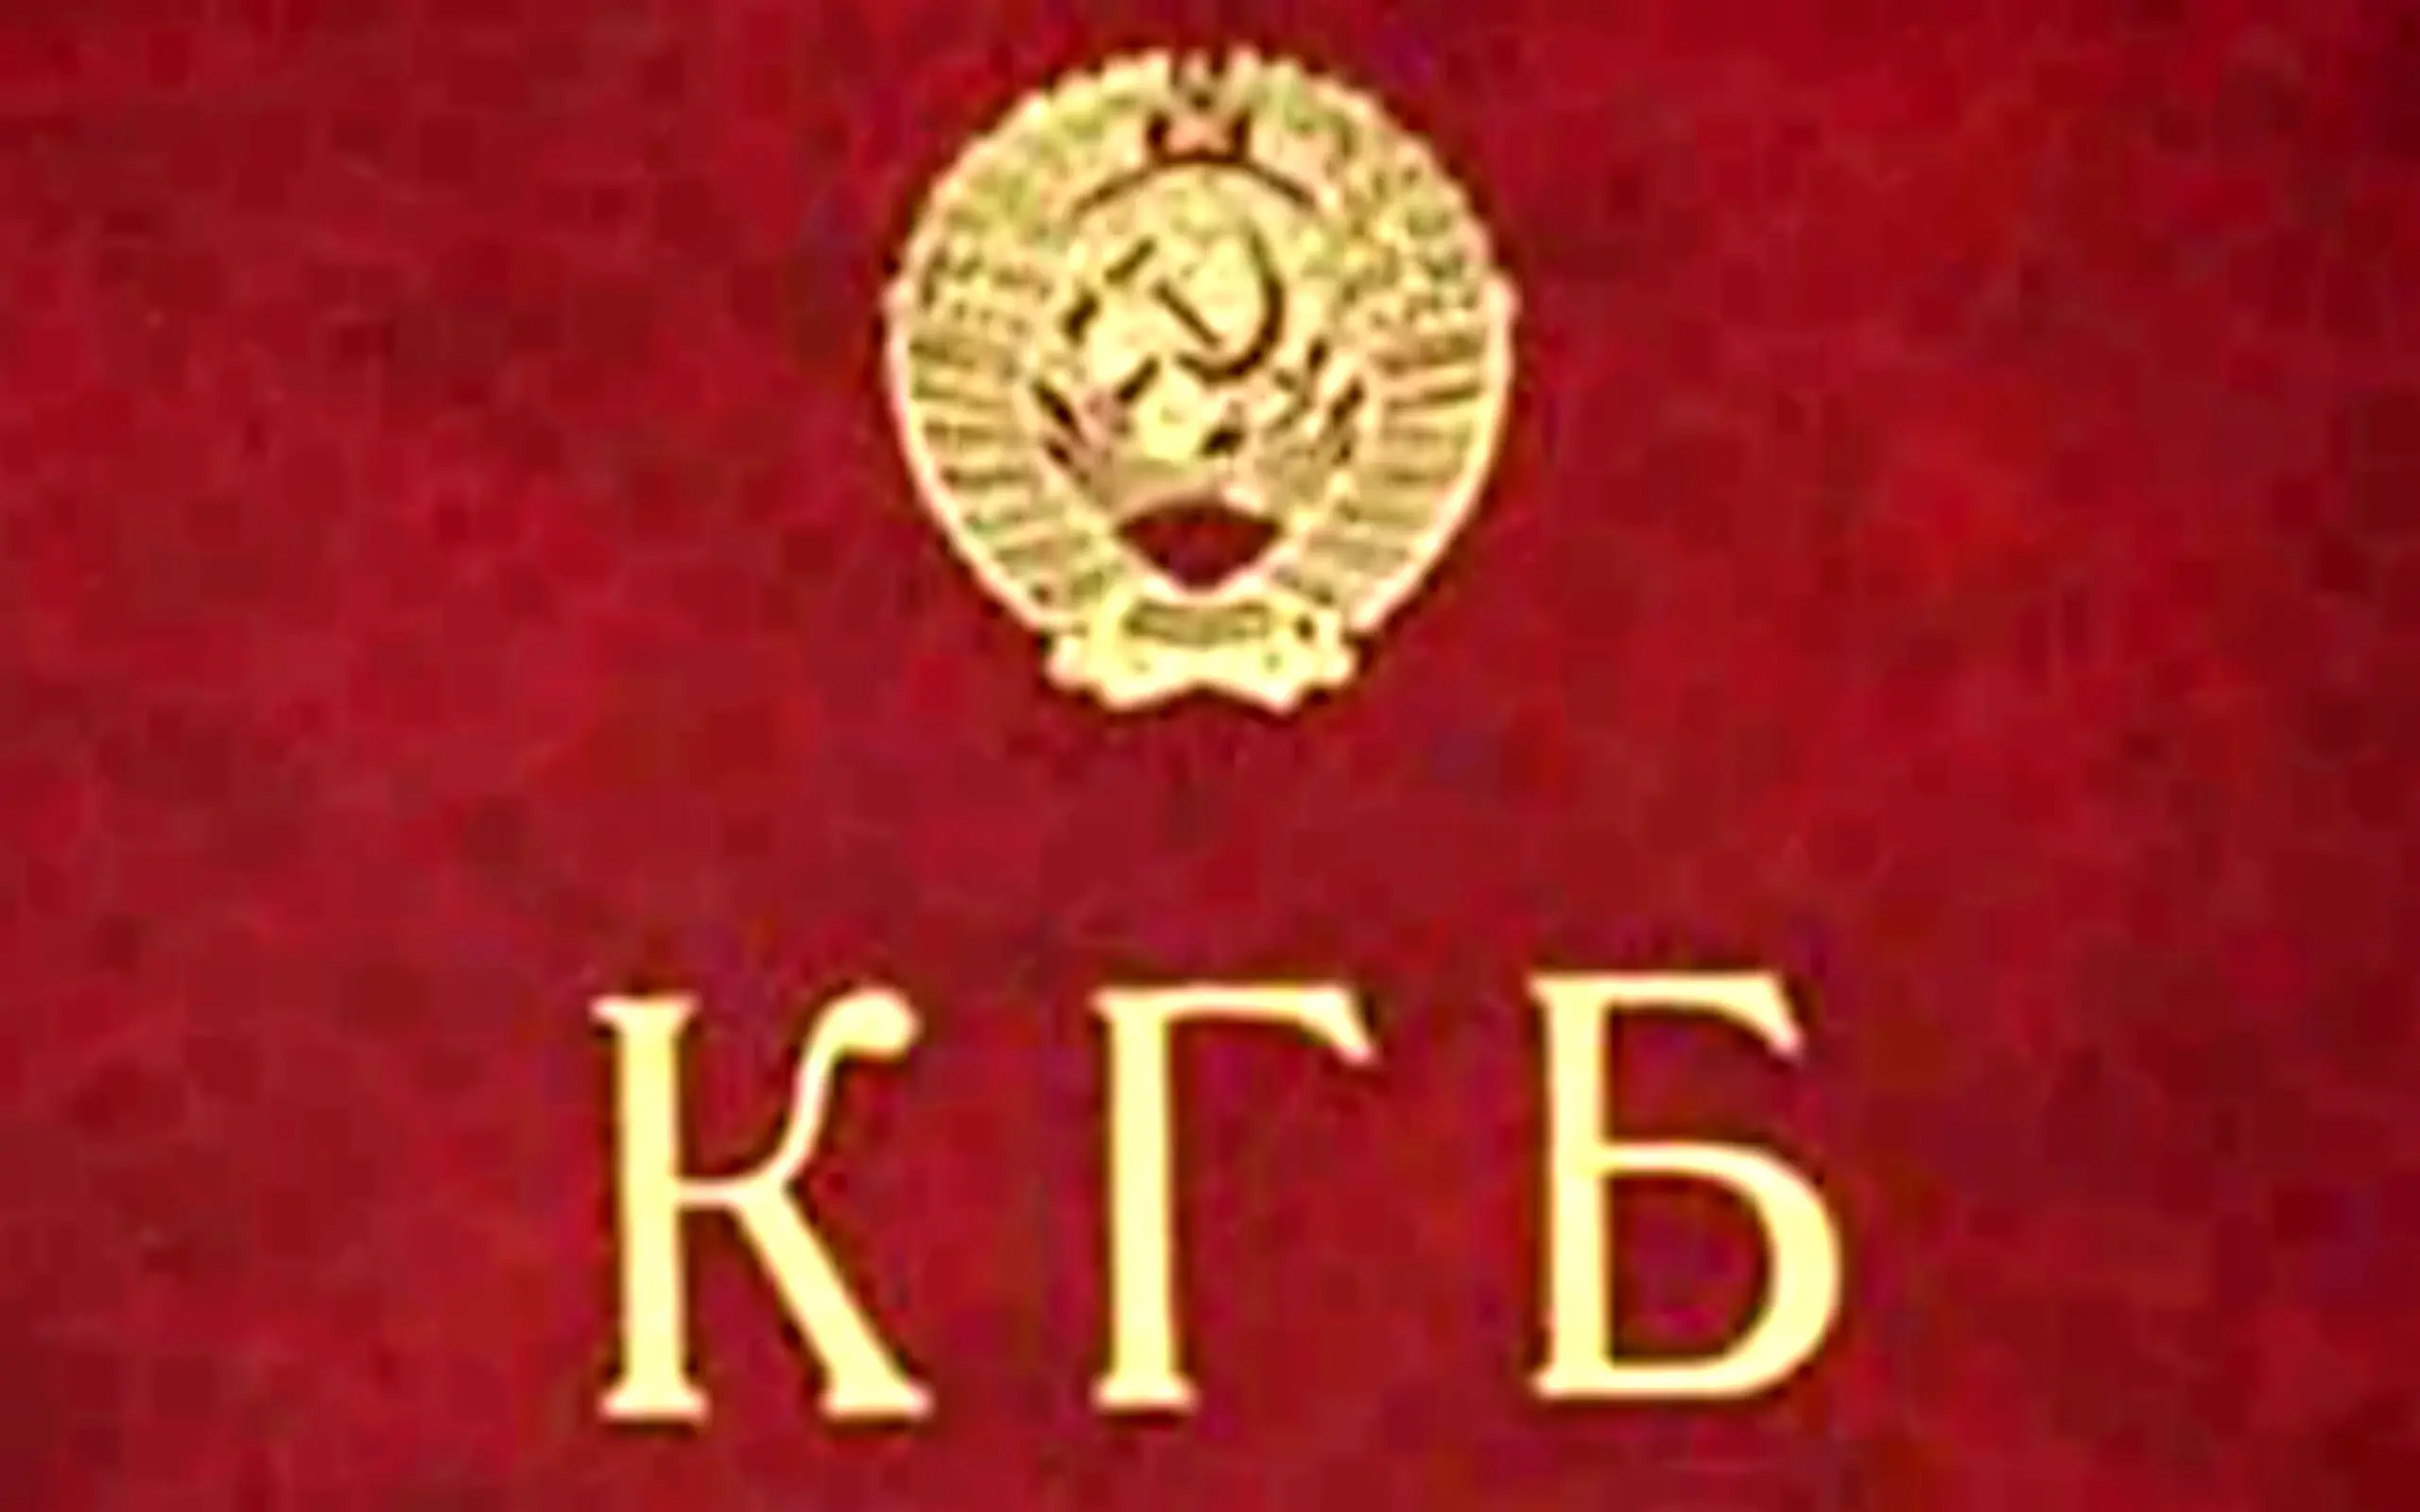 KGB (Russian Committee for State Security) symbol